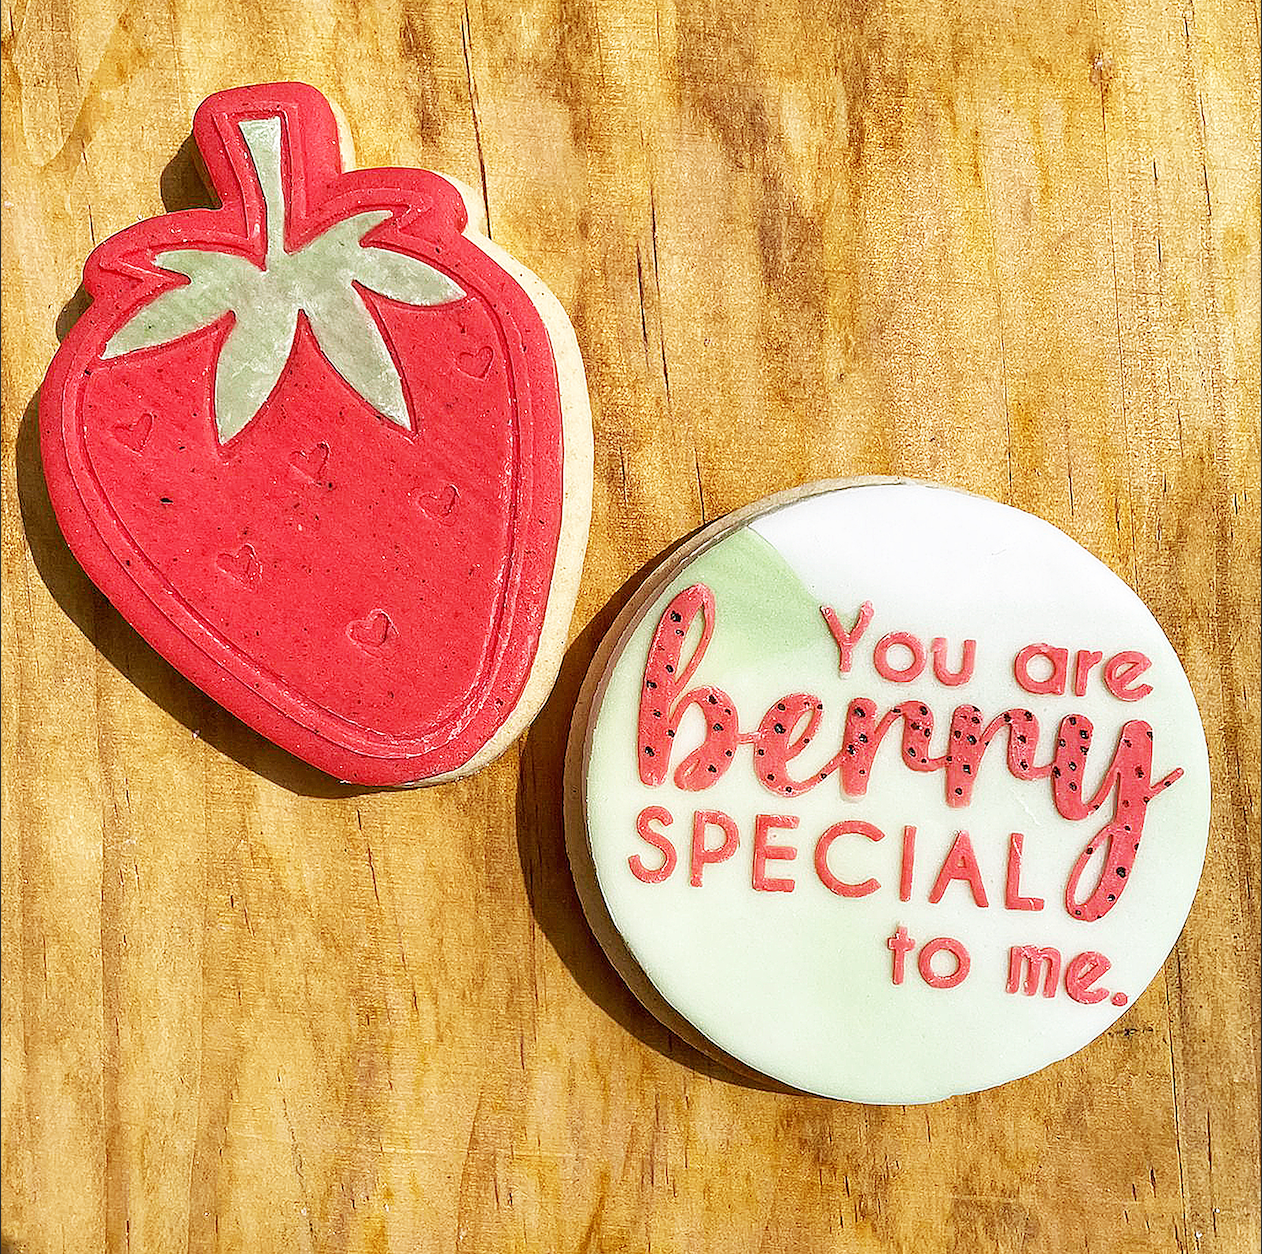 You are Berry Special to me debossing MEG cookie cutters